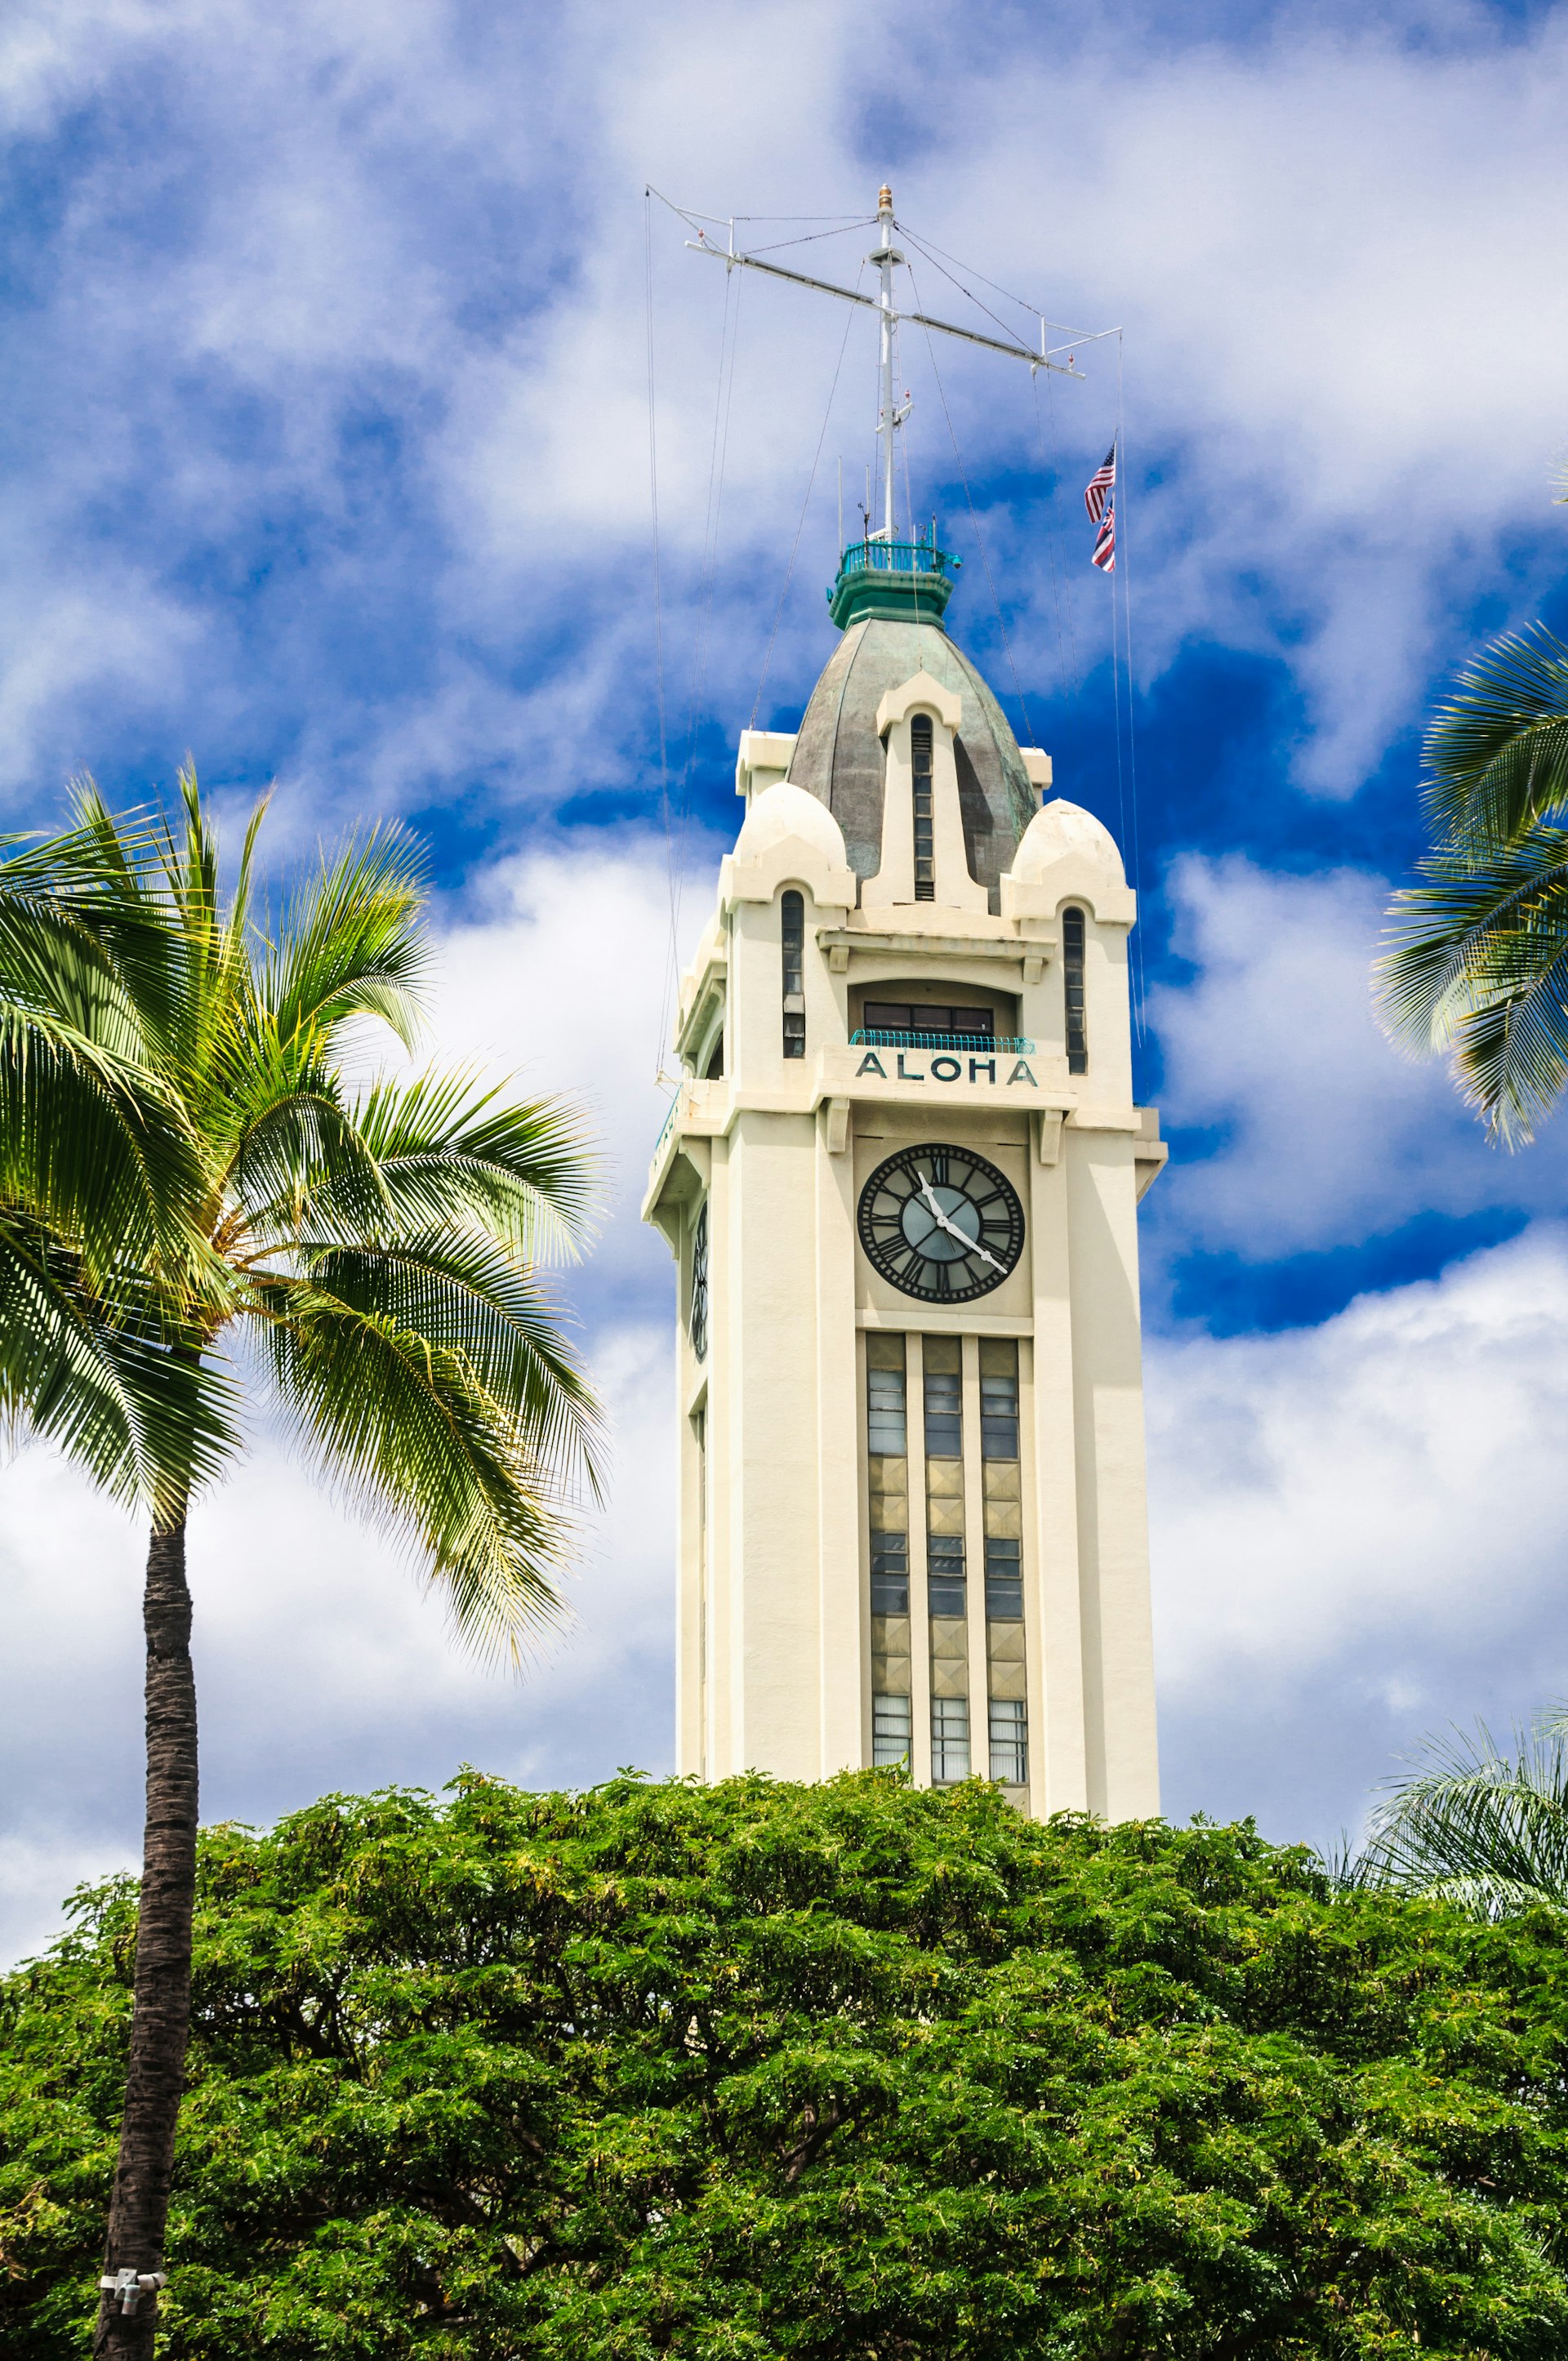 A vertical shot of a tall white clock tower with palm trees in the foreground and lovely blue skies behind